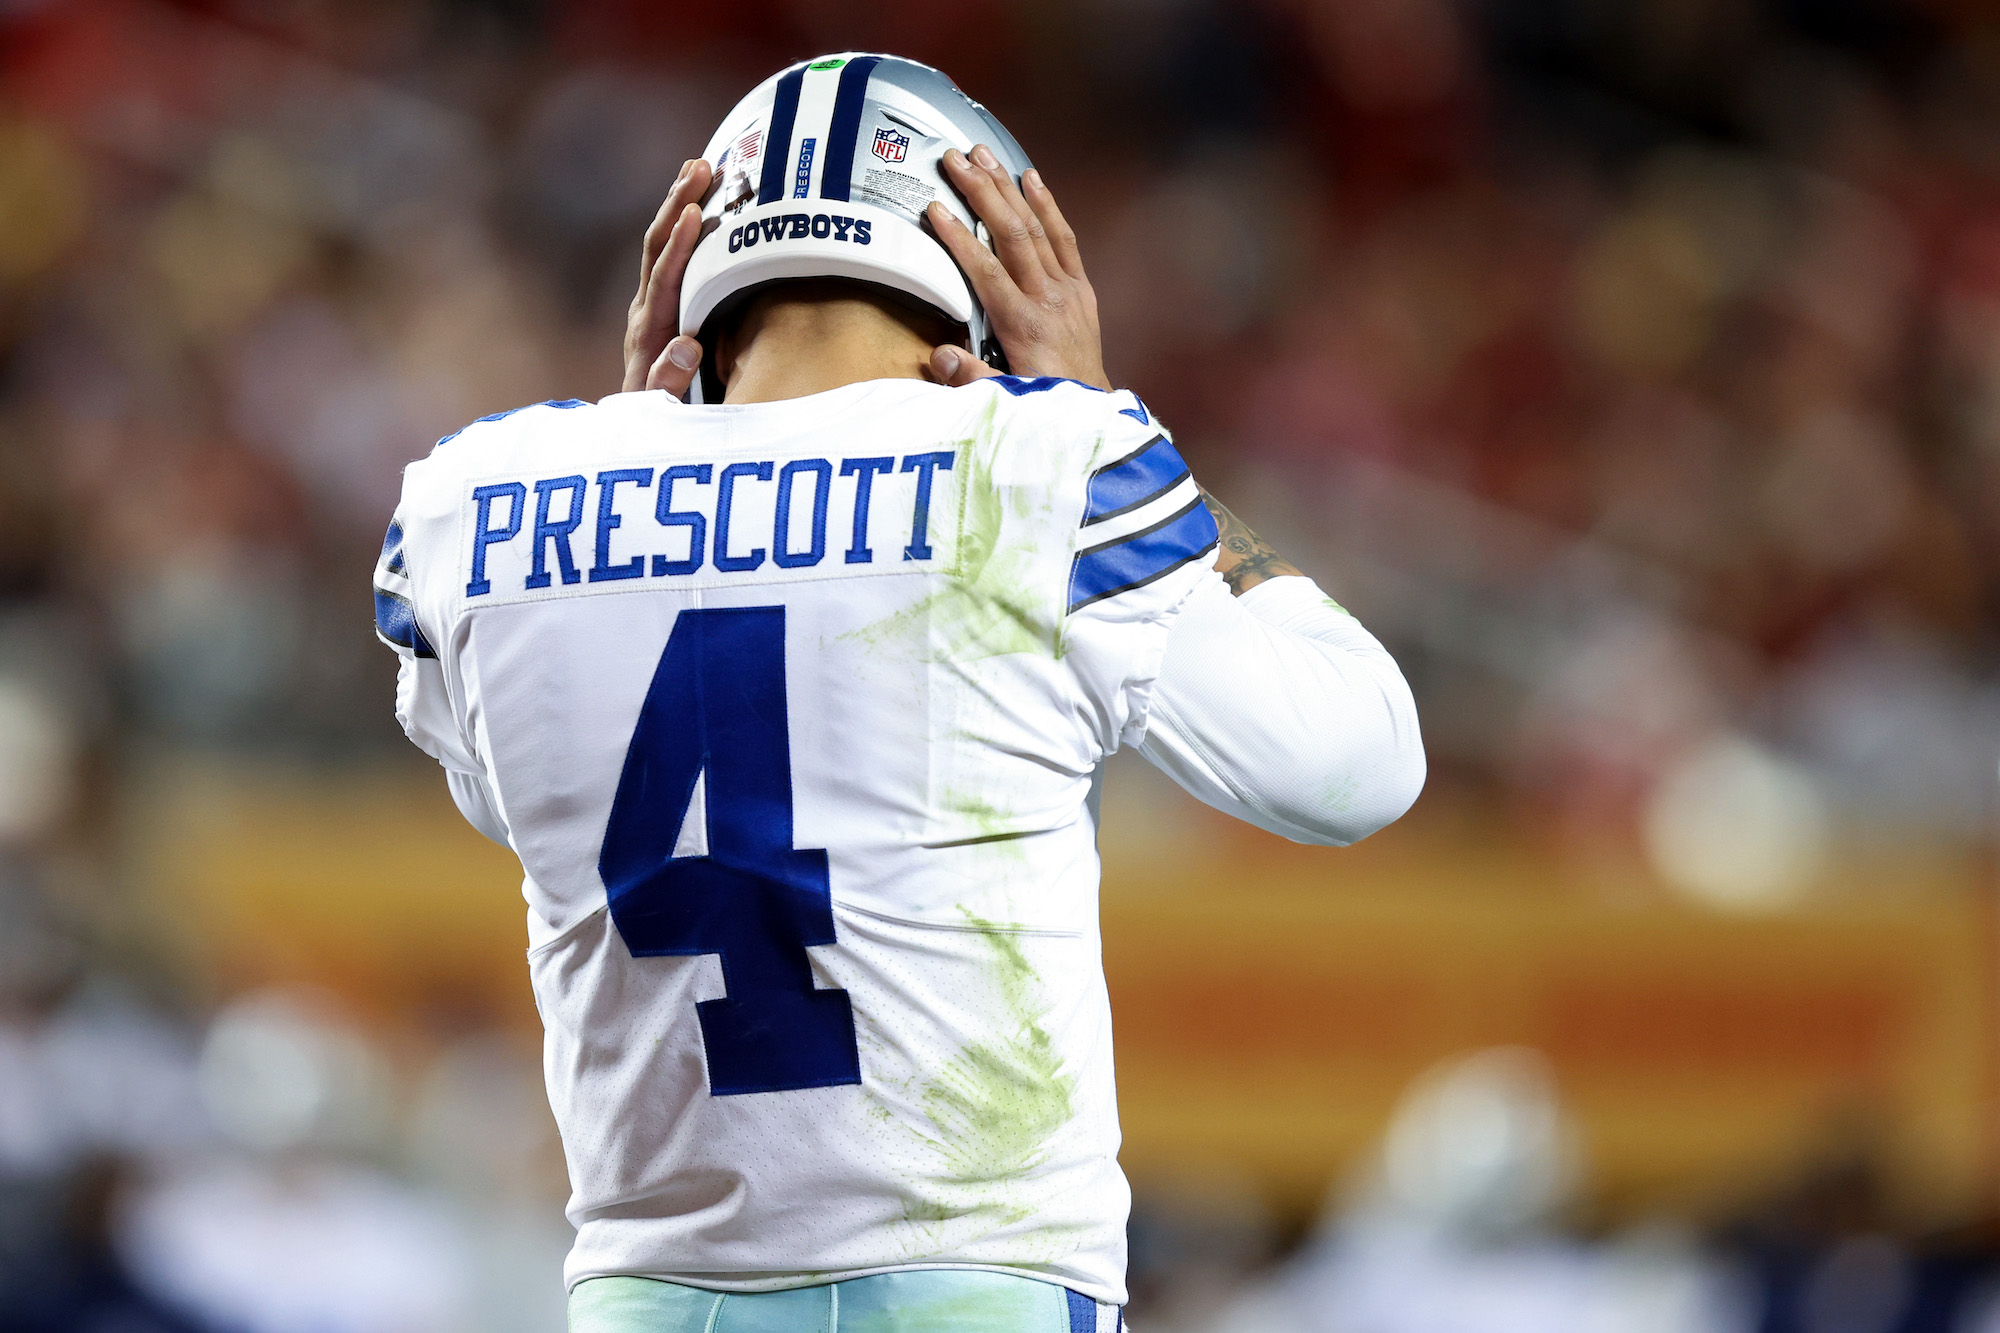 SANTA CLARA, CALIFORNIA - JANUARY 22: Dak Prescott #4 of the Dallas Cowboys reacts during the second half of the game against the San Francisco 49ers in the NFC Divisional Playoff game at Levi's Stadium on January 22, 2023 in Santa Clara, California. (Photo by Lachlan Cunningham/Getty Images)